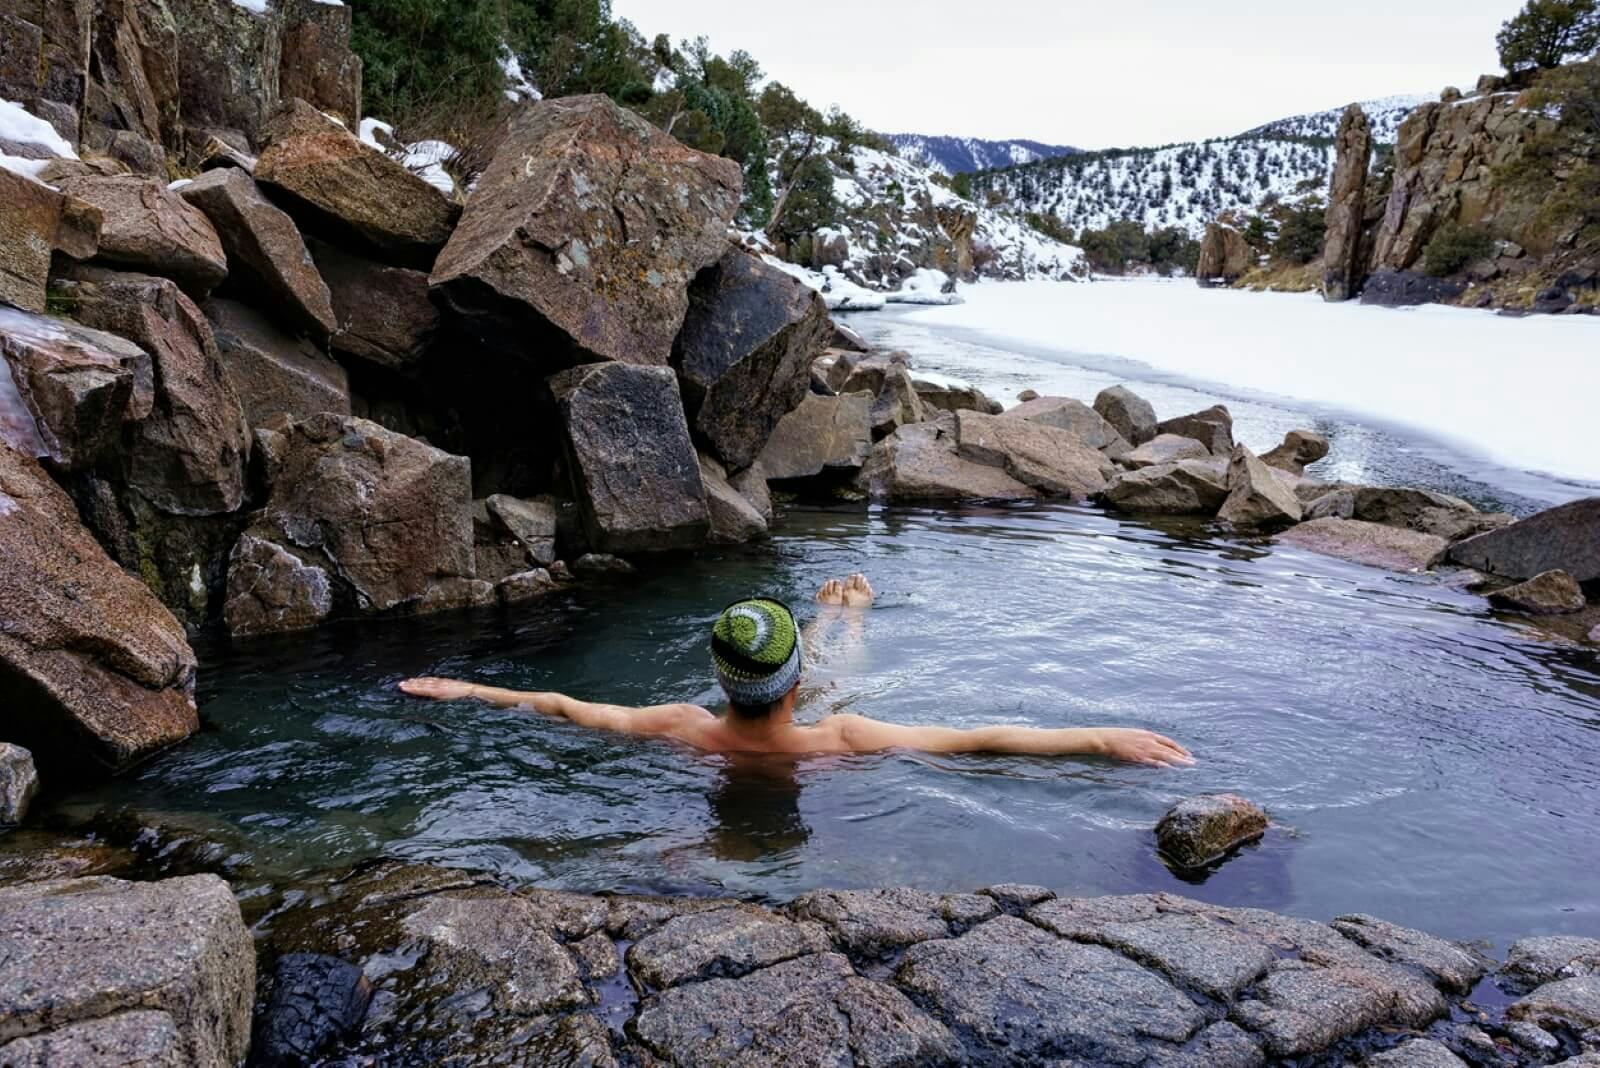 A man relaxing in natural hot springs in Colorado